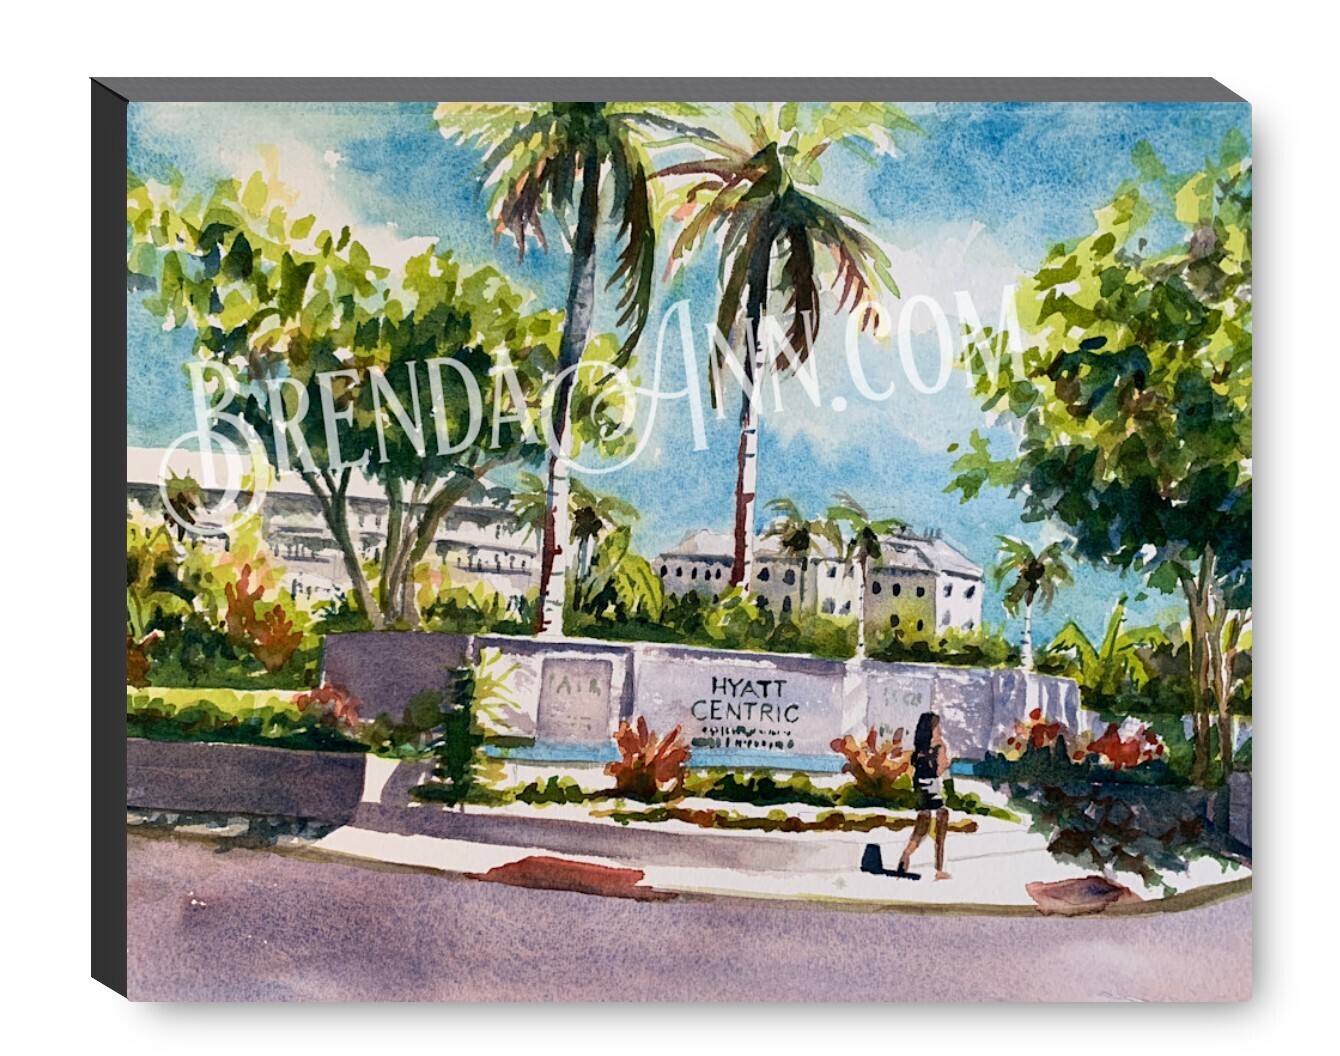 Hyatt Centric Resort Key West Canvas Gallery Wrapped Print - Watercolor Art - Ready to hang on a wall